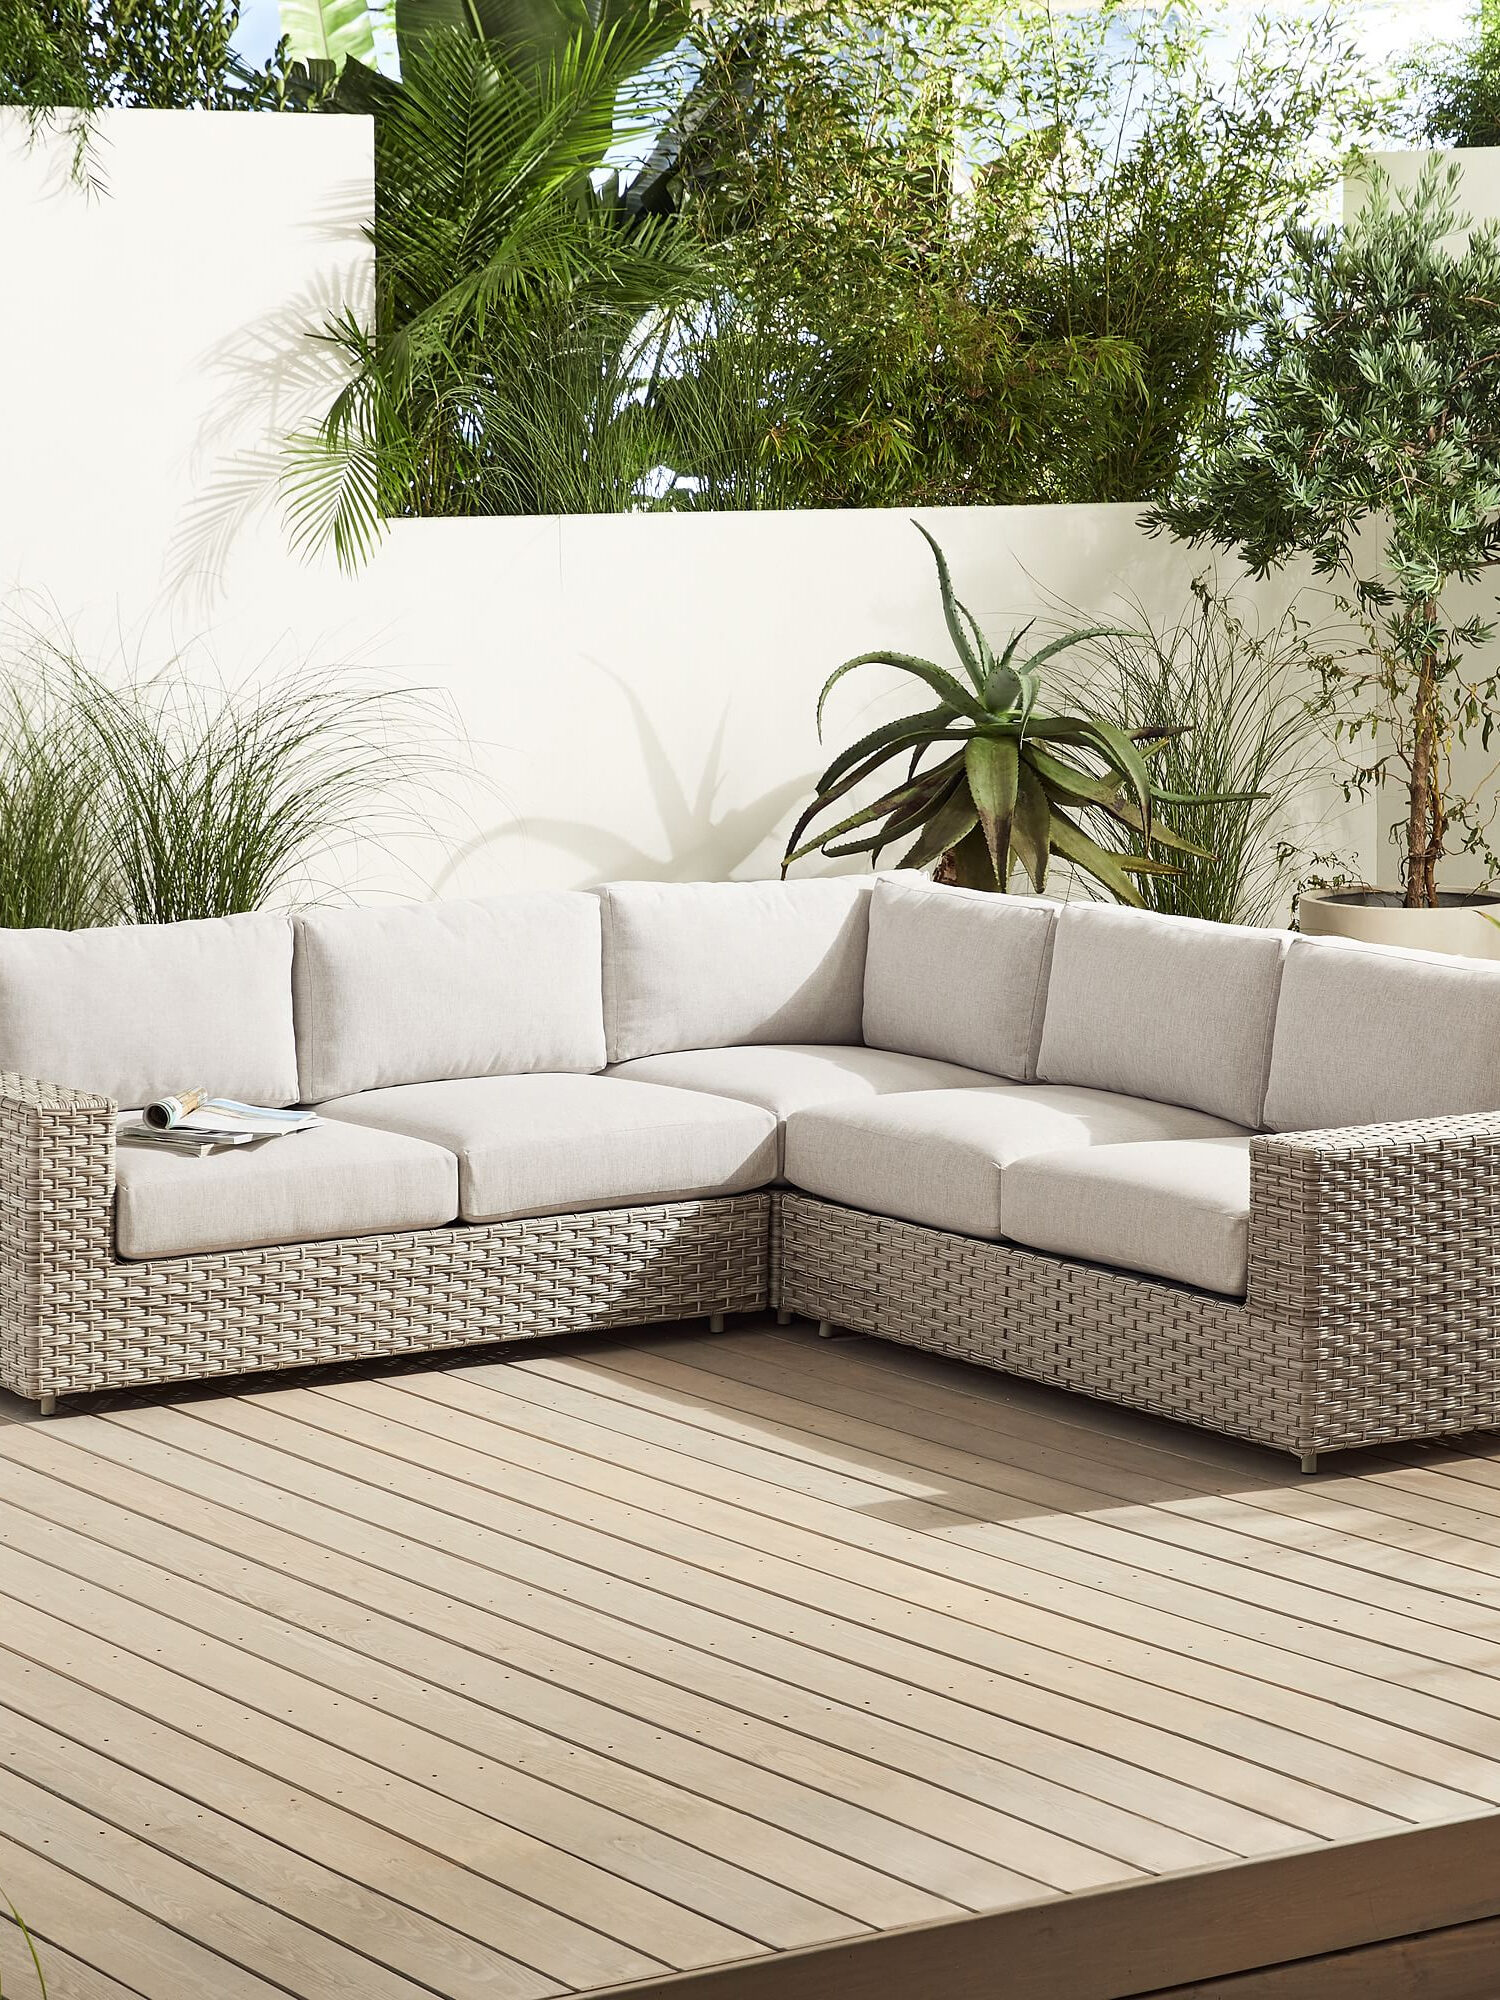 A white wicker sectional sofa on a wooden deck.